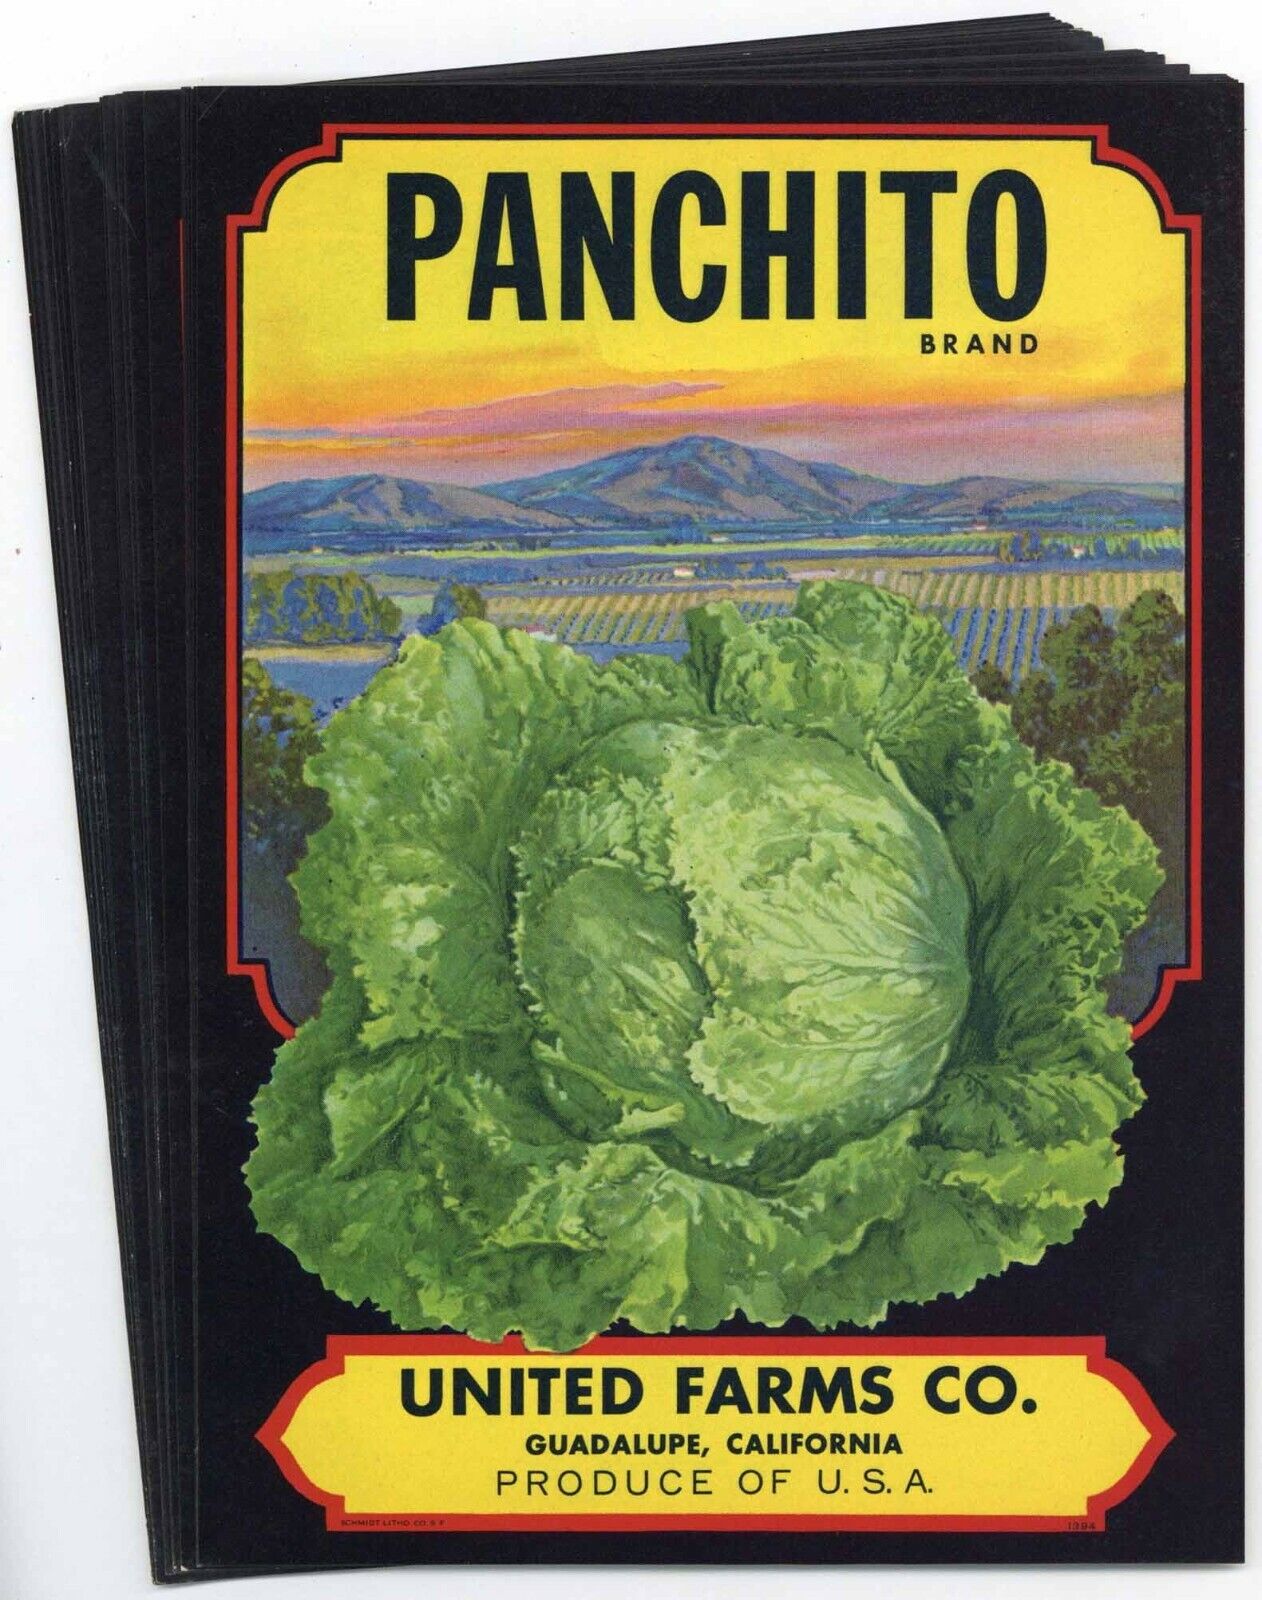 25 Panchito Brand Guadalupe California Vegetable Crate Labels, Wholesale